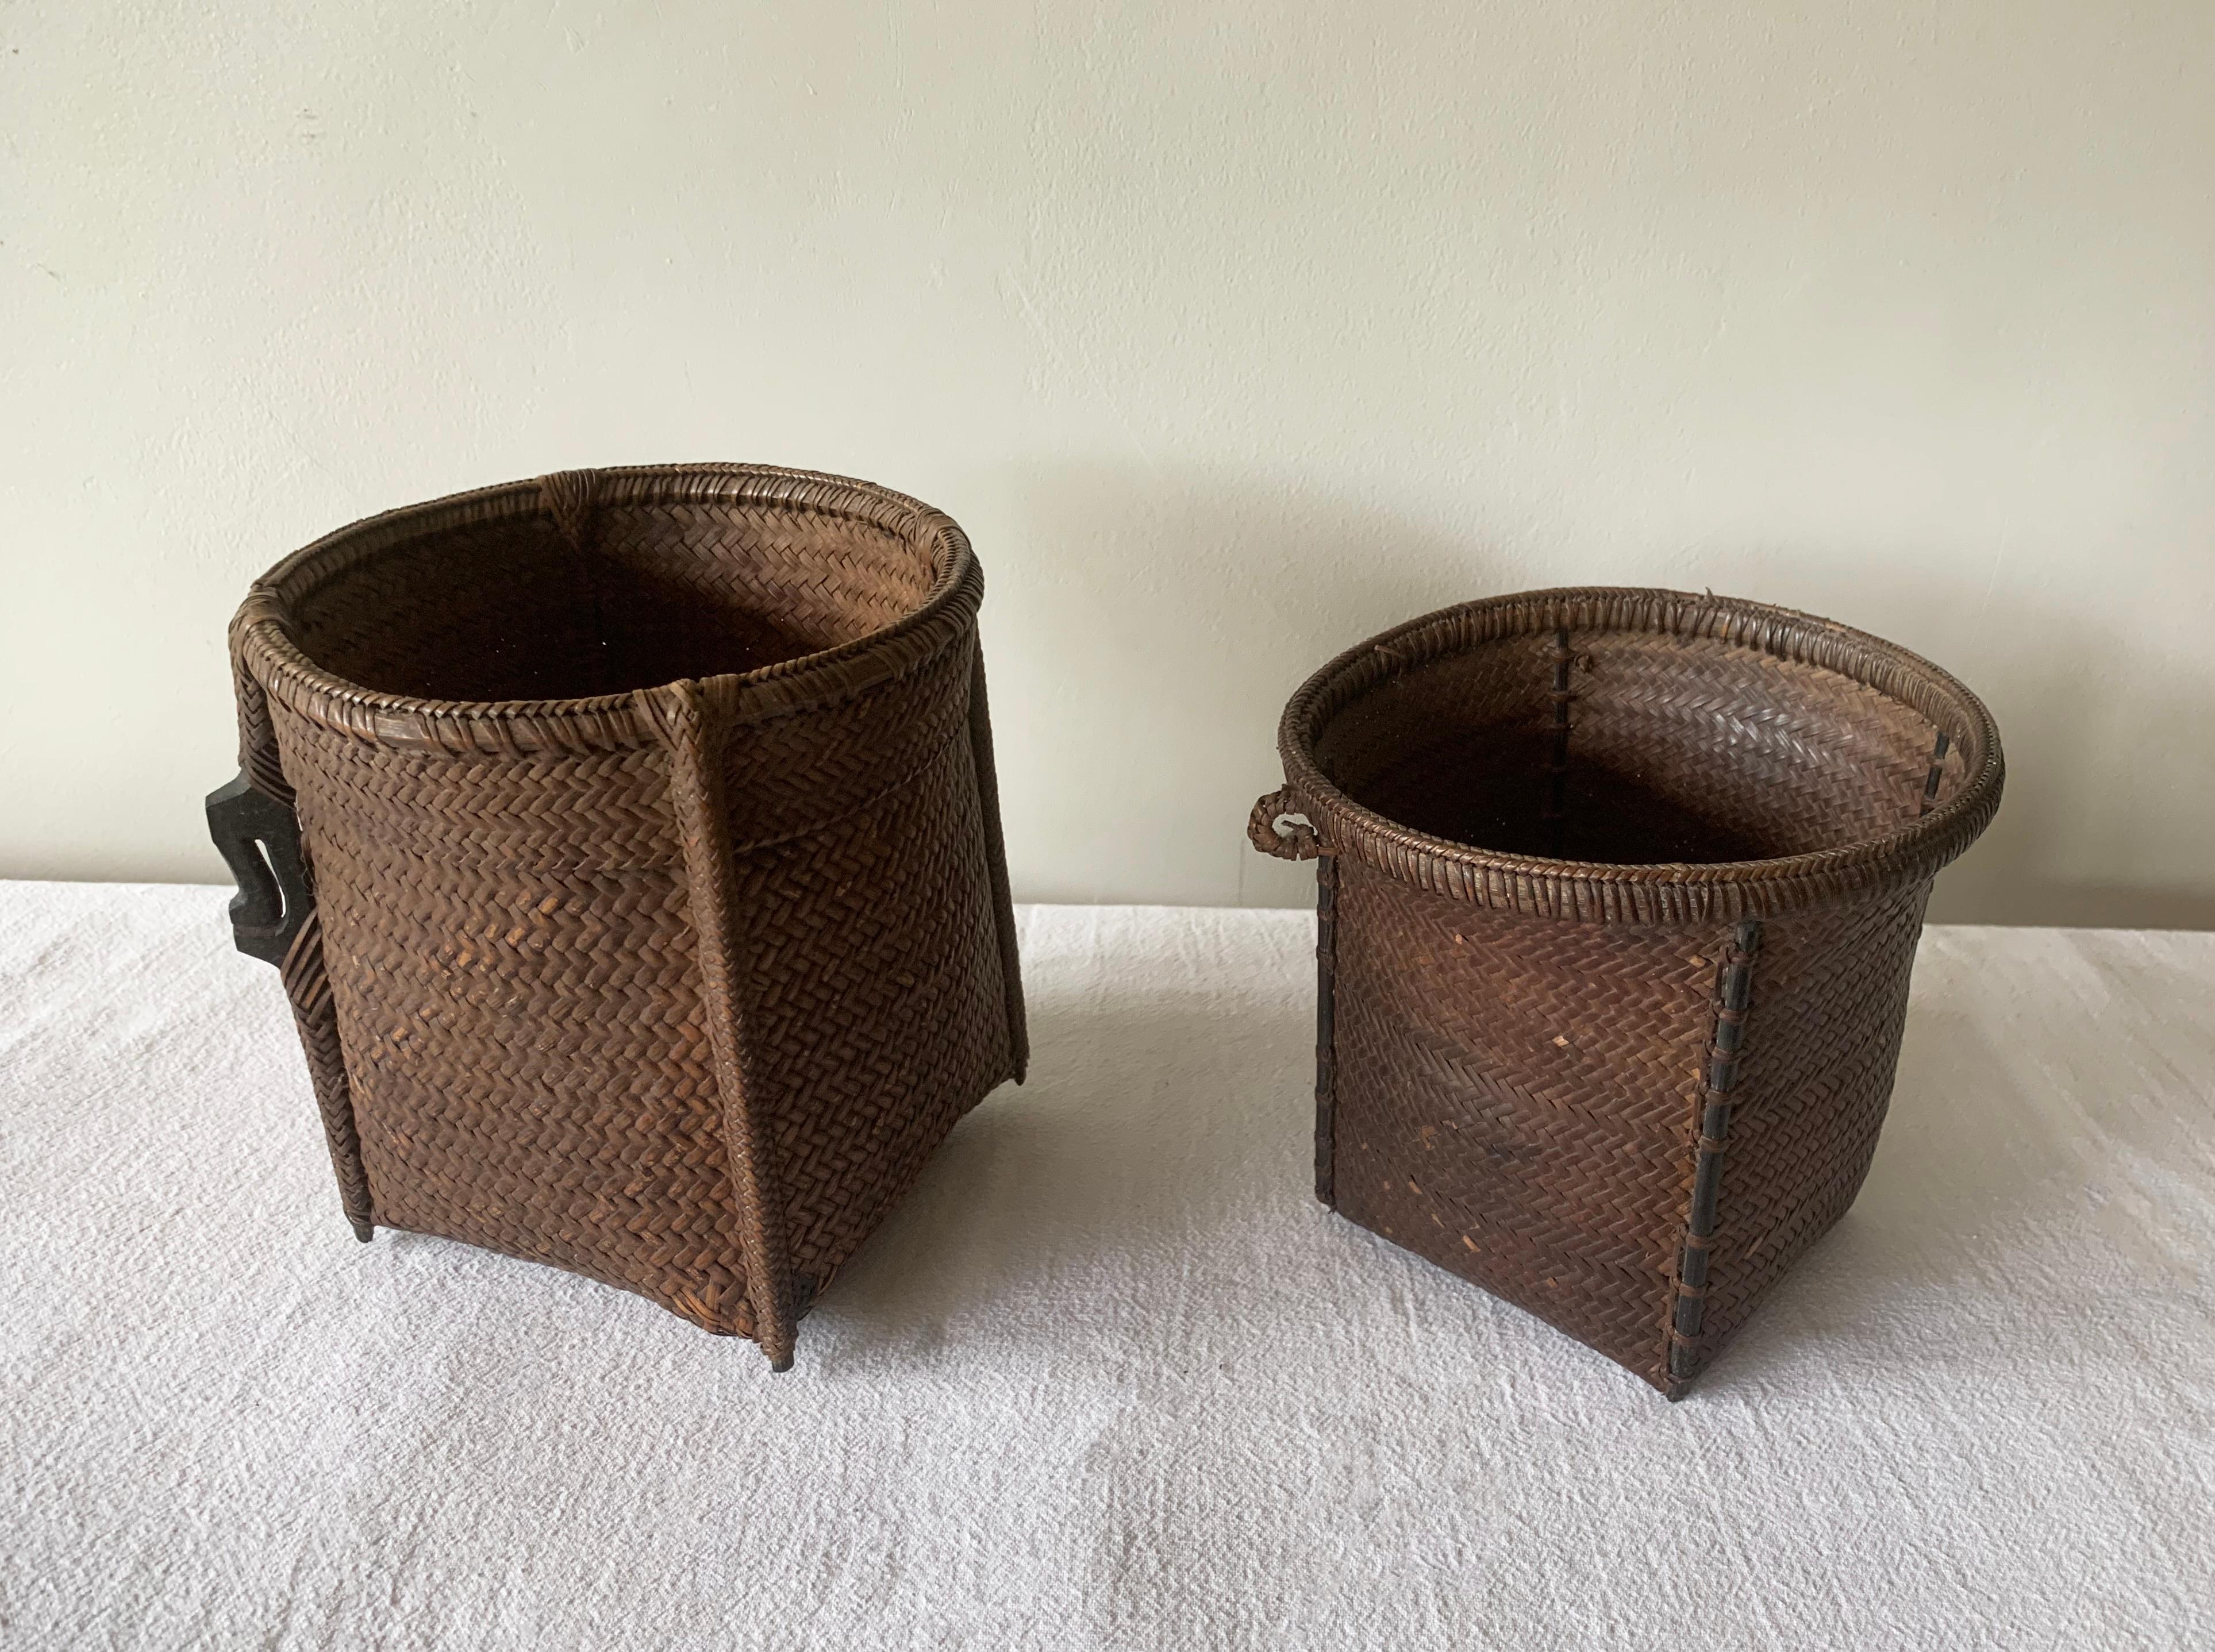 This pair of small mid-20th century hand-woven baskets originate from the Dayak tribe of Borneo. They were crafted with rattan fibres and an iron wood frame. While larger versions of these baskets were used to carry leaves, fruit, grain and wood its